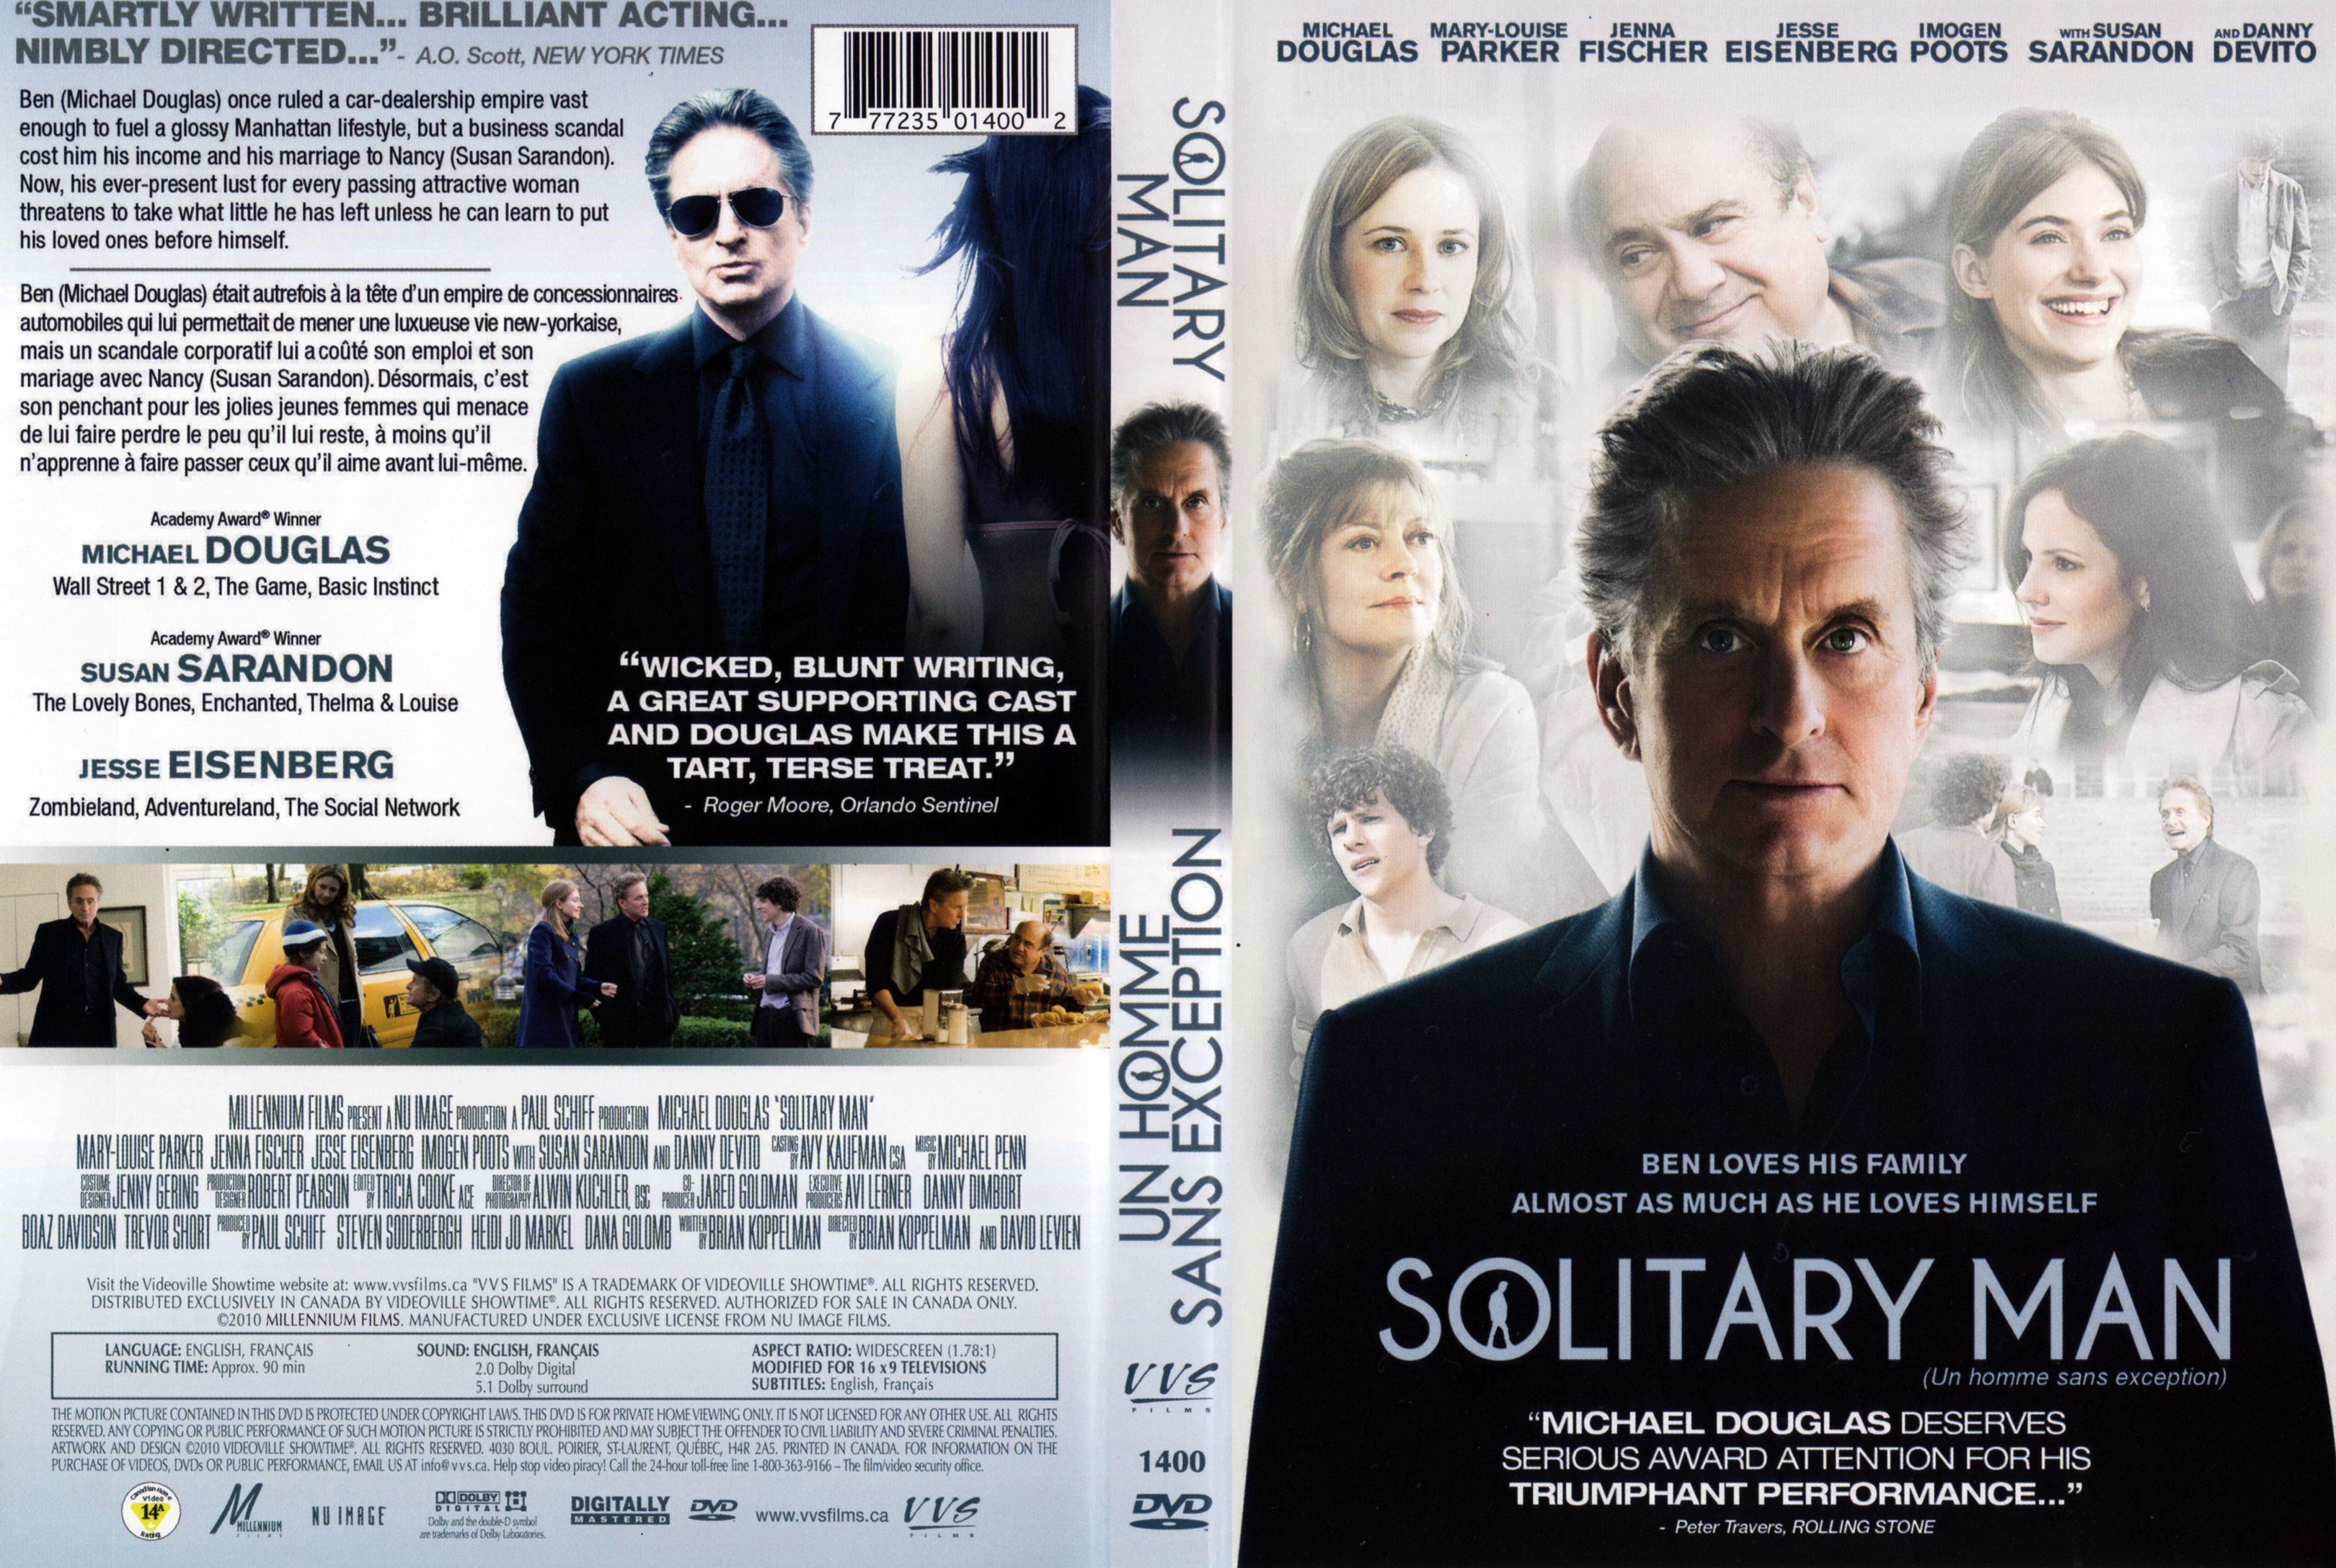 Jaquette DVD Solitary man (Canadienne)